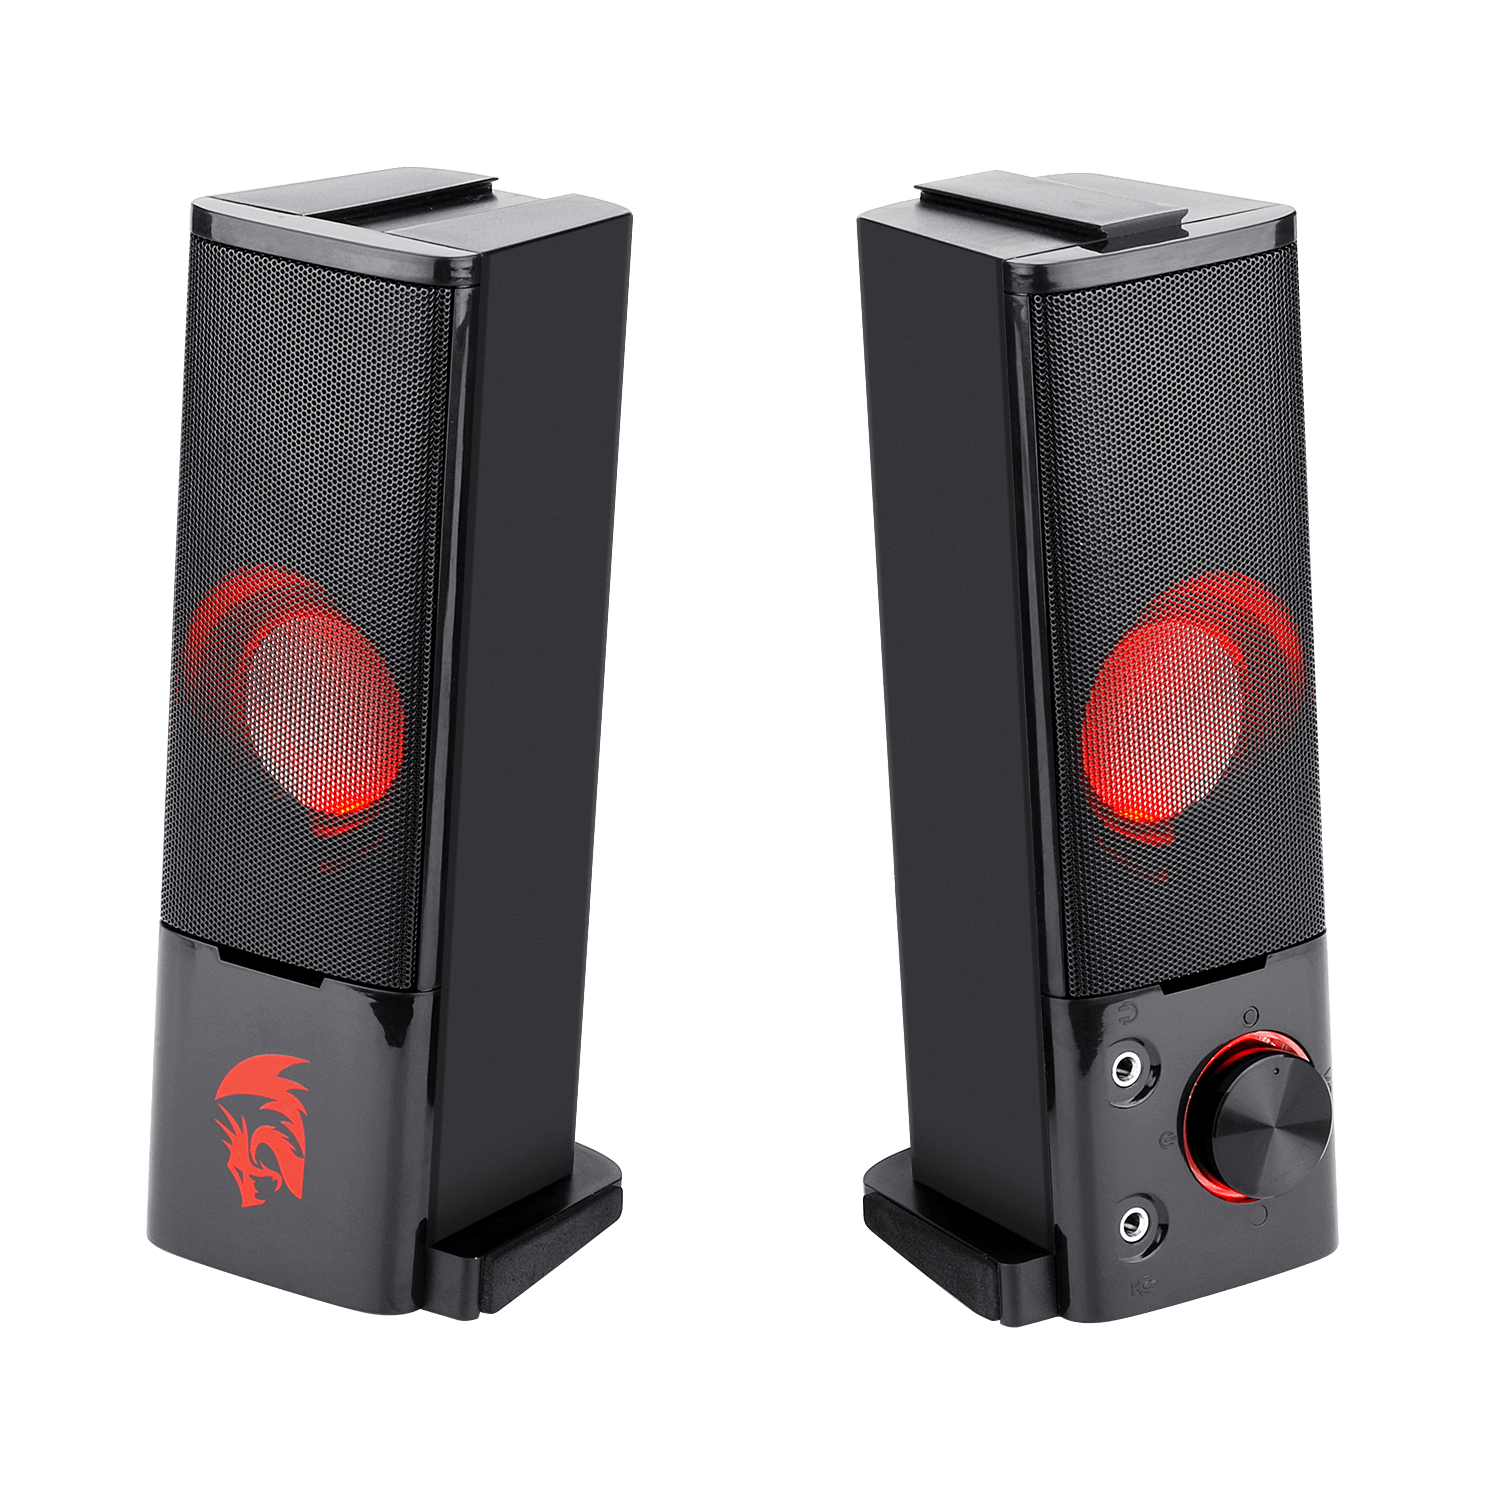 Redragon GS550 Orpheus PC Speakers Channel Stereo Redragonshop